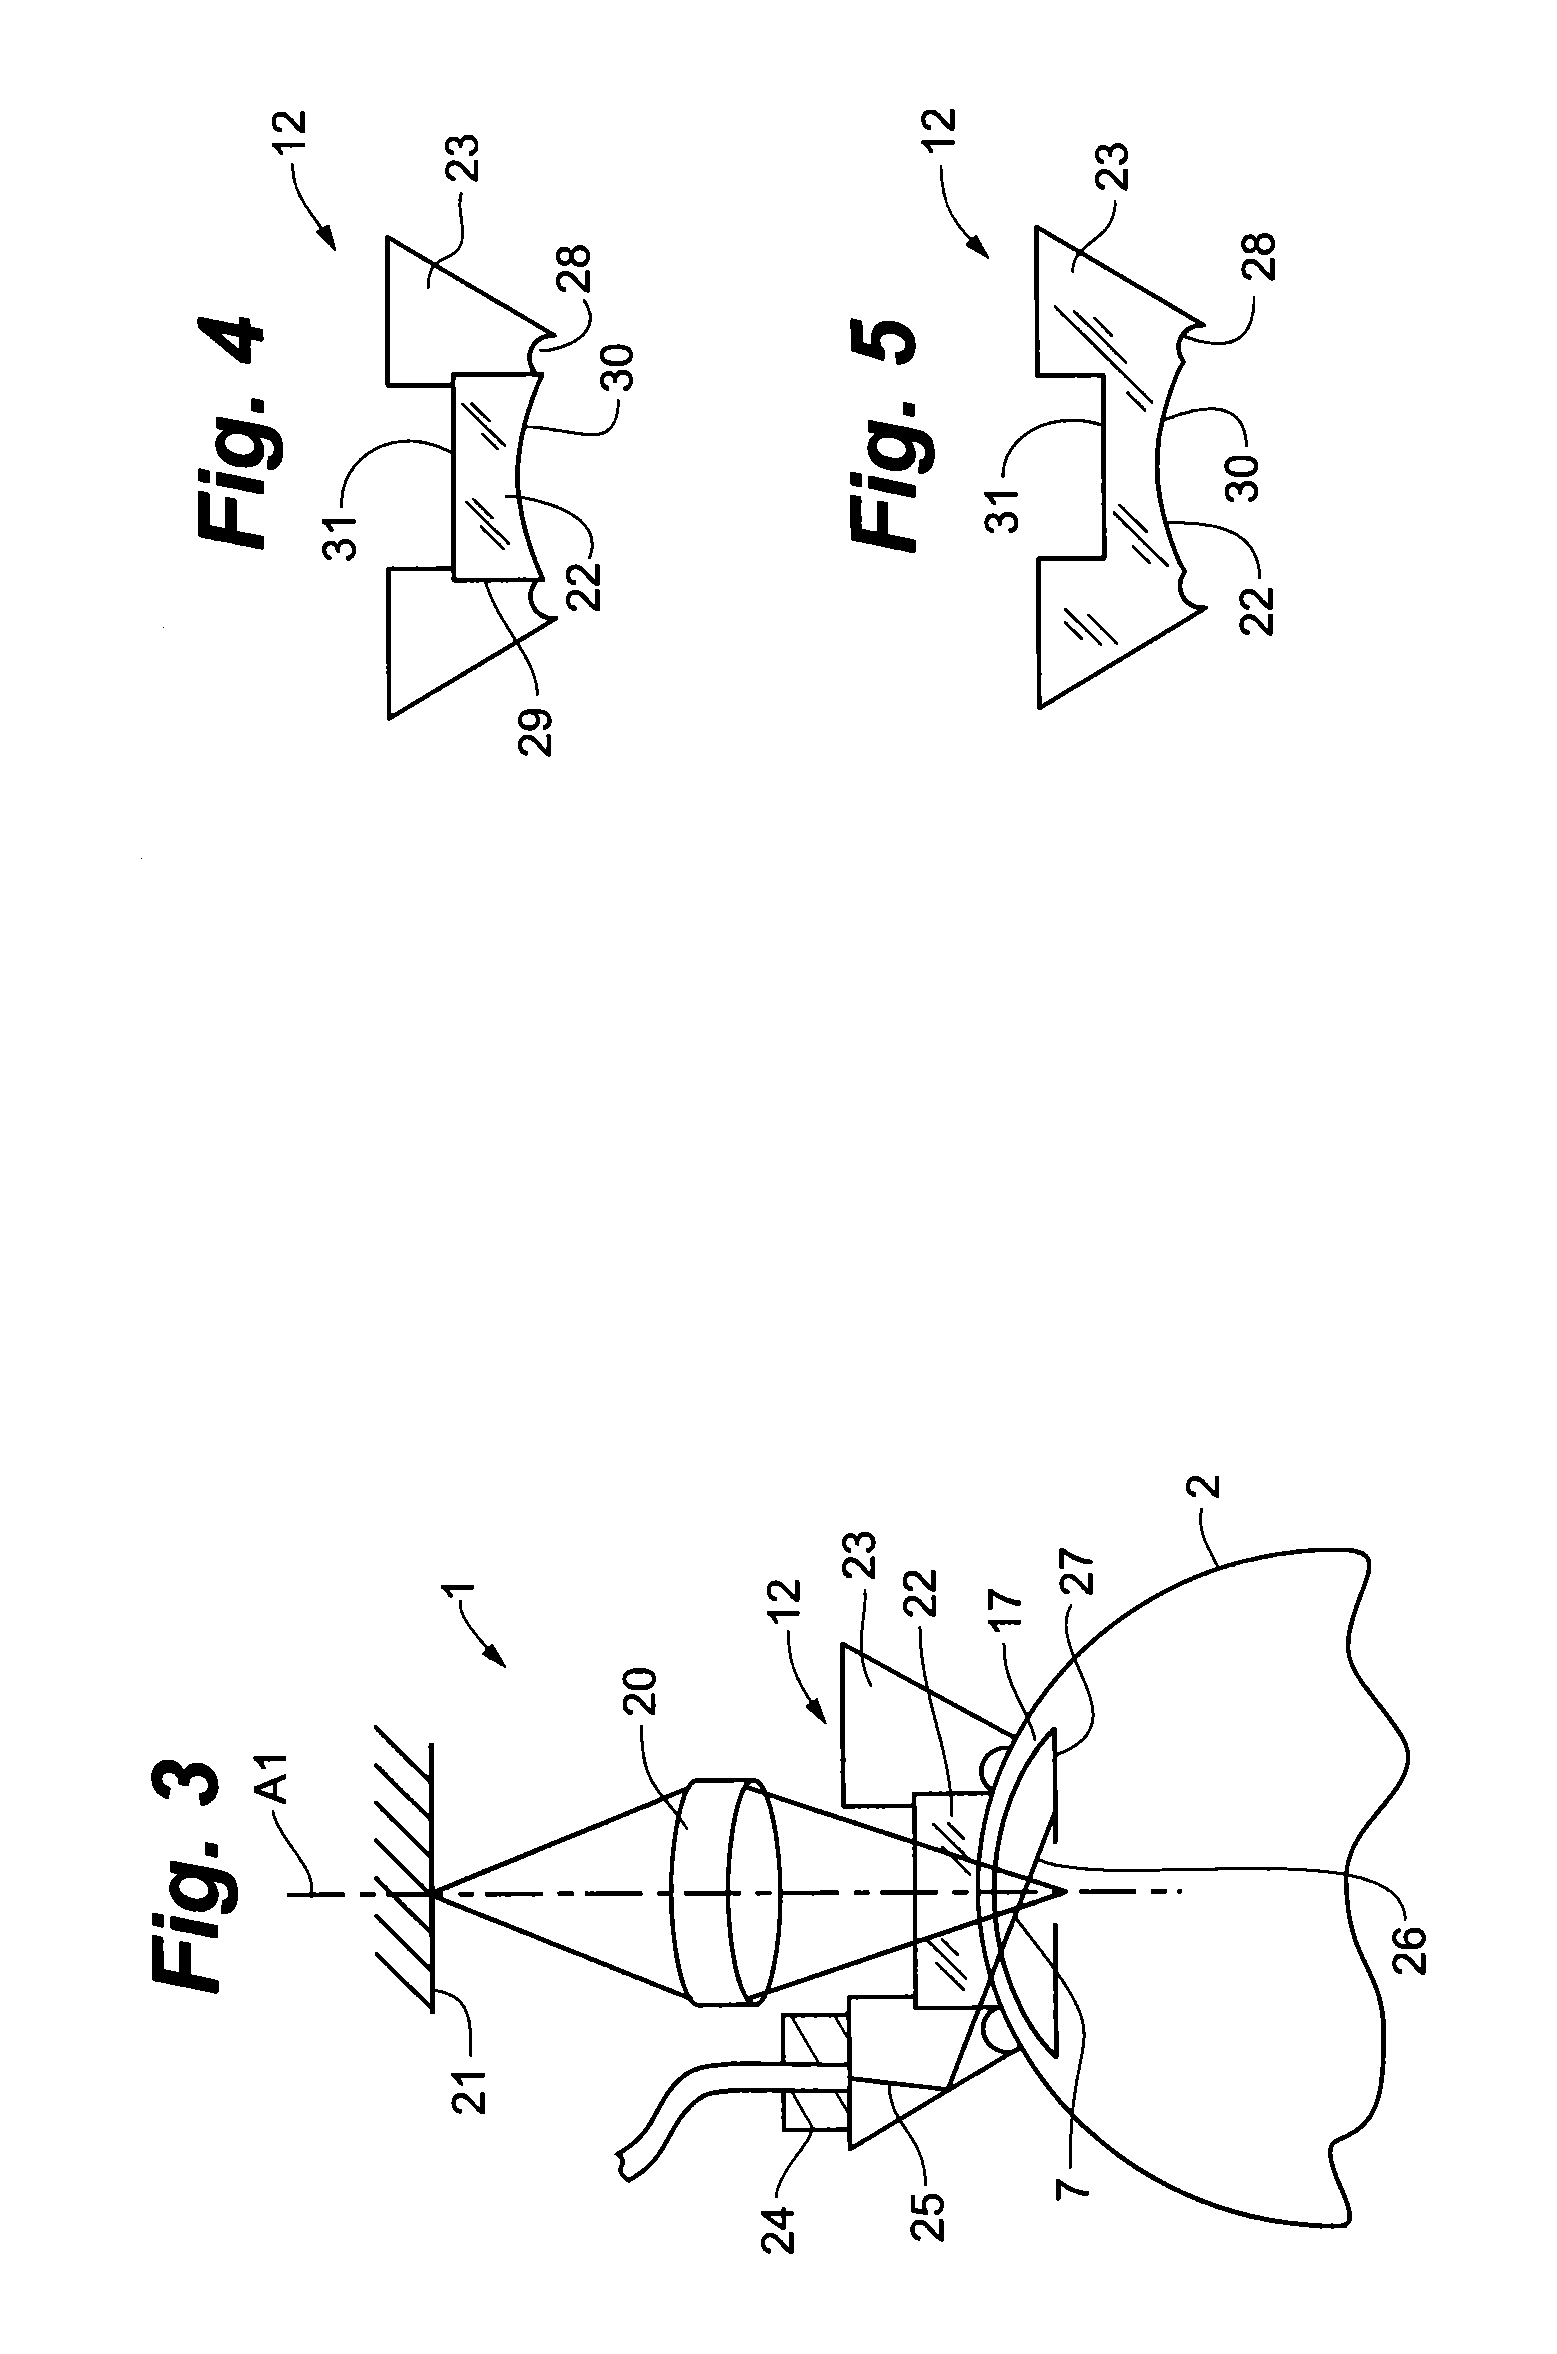 Adapter for coupling a laser processing device to an object